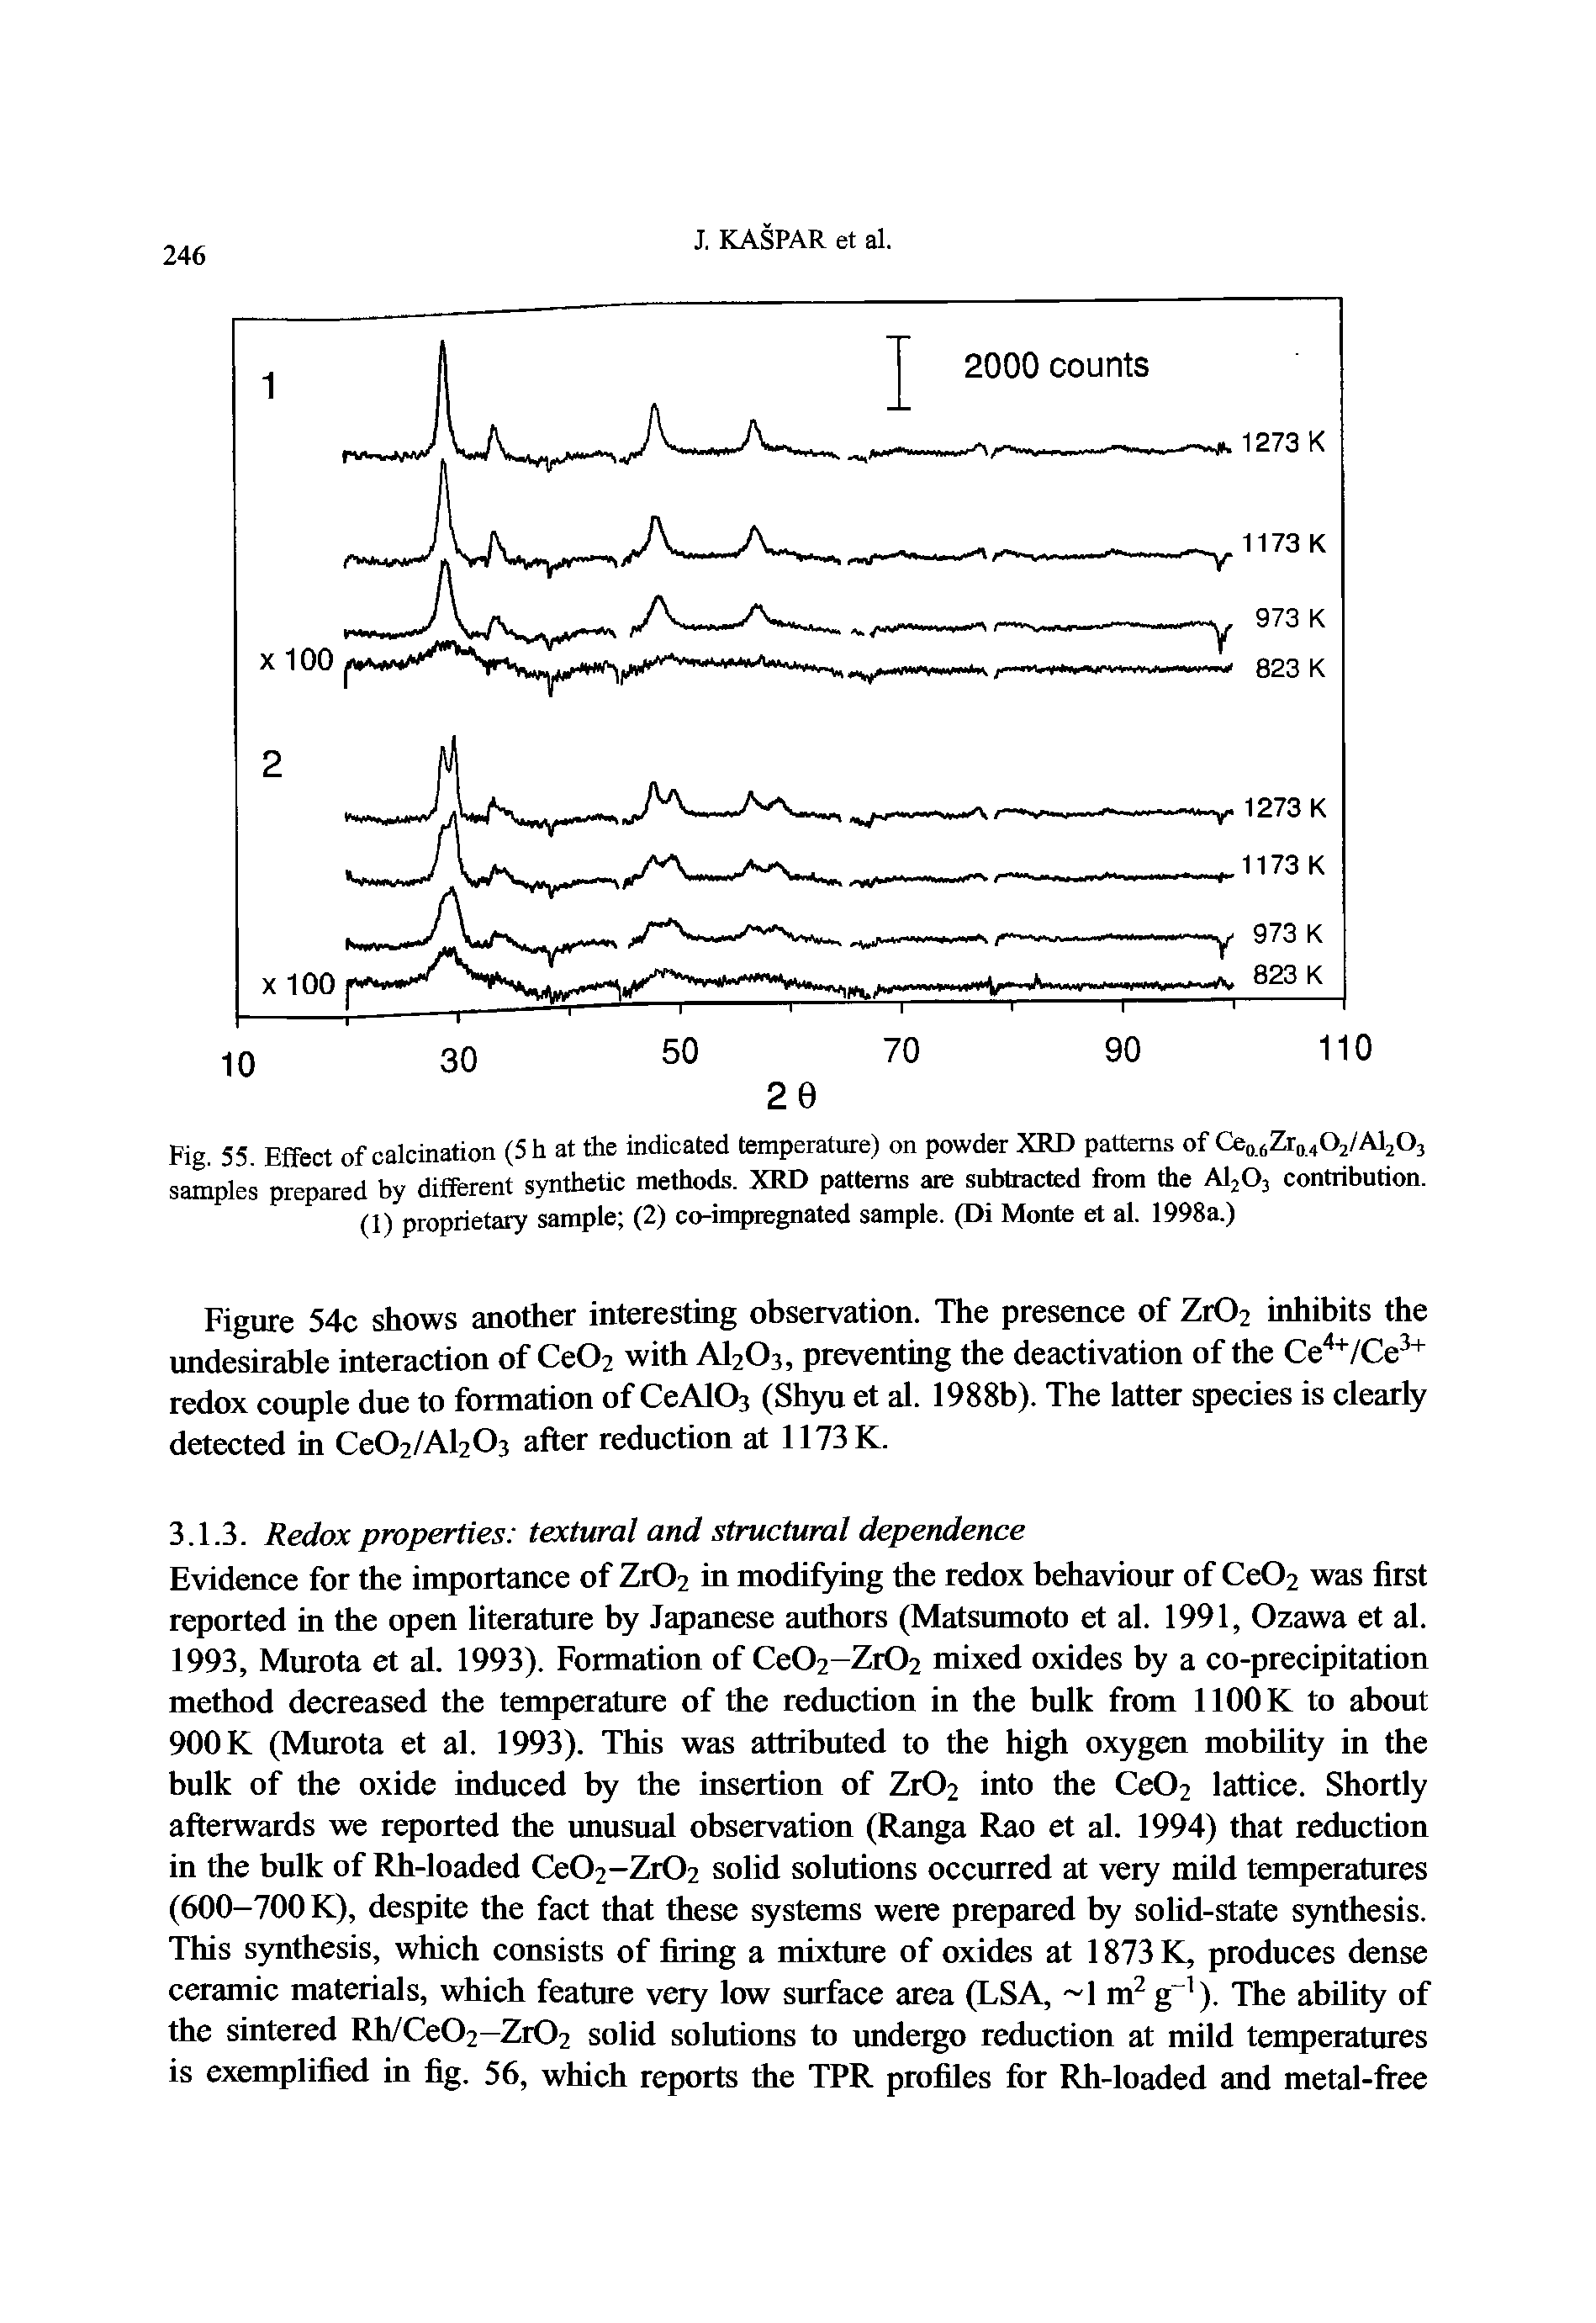 Fig. 55. Effect of calcination (5h at the indicated temperature) on powder XRD patterns of Ce0.6Zr0 4O2/Al2O3 samples prepared by different synthetic methods. XRD patterns are subtracted from the A1203 contribution. (1) proprietary sample (2) co-impregnated sample. (Di Monte et al. 1998a.)...